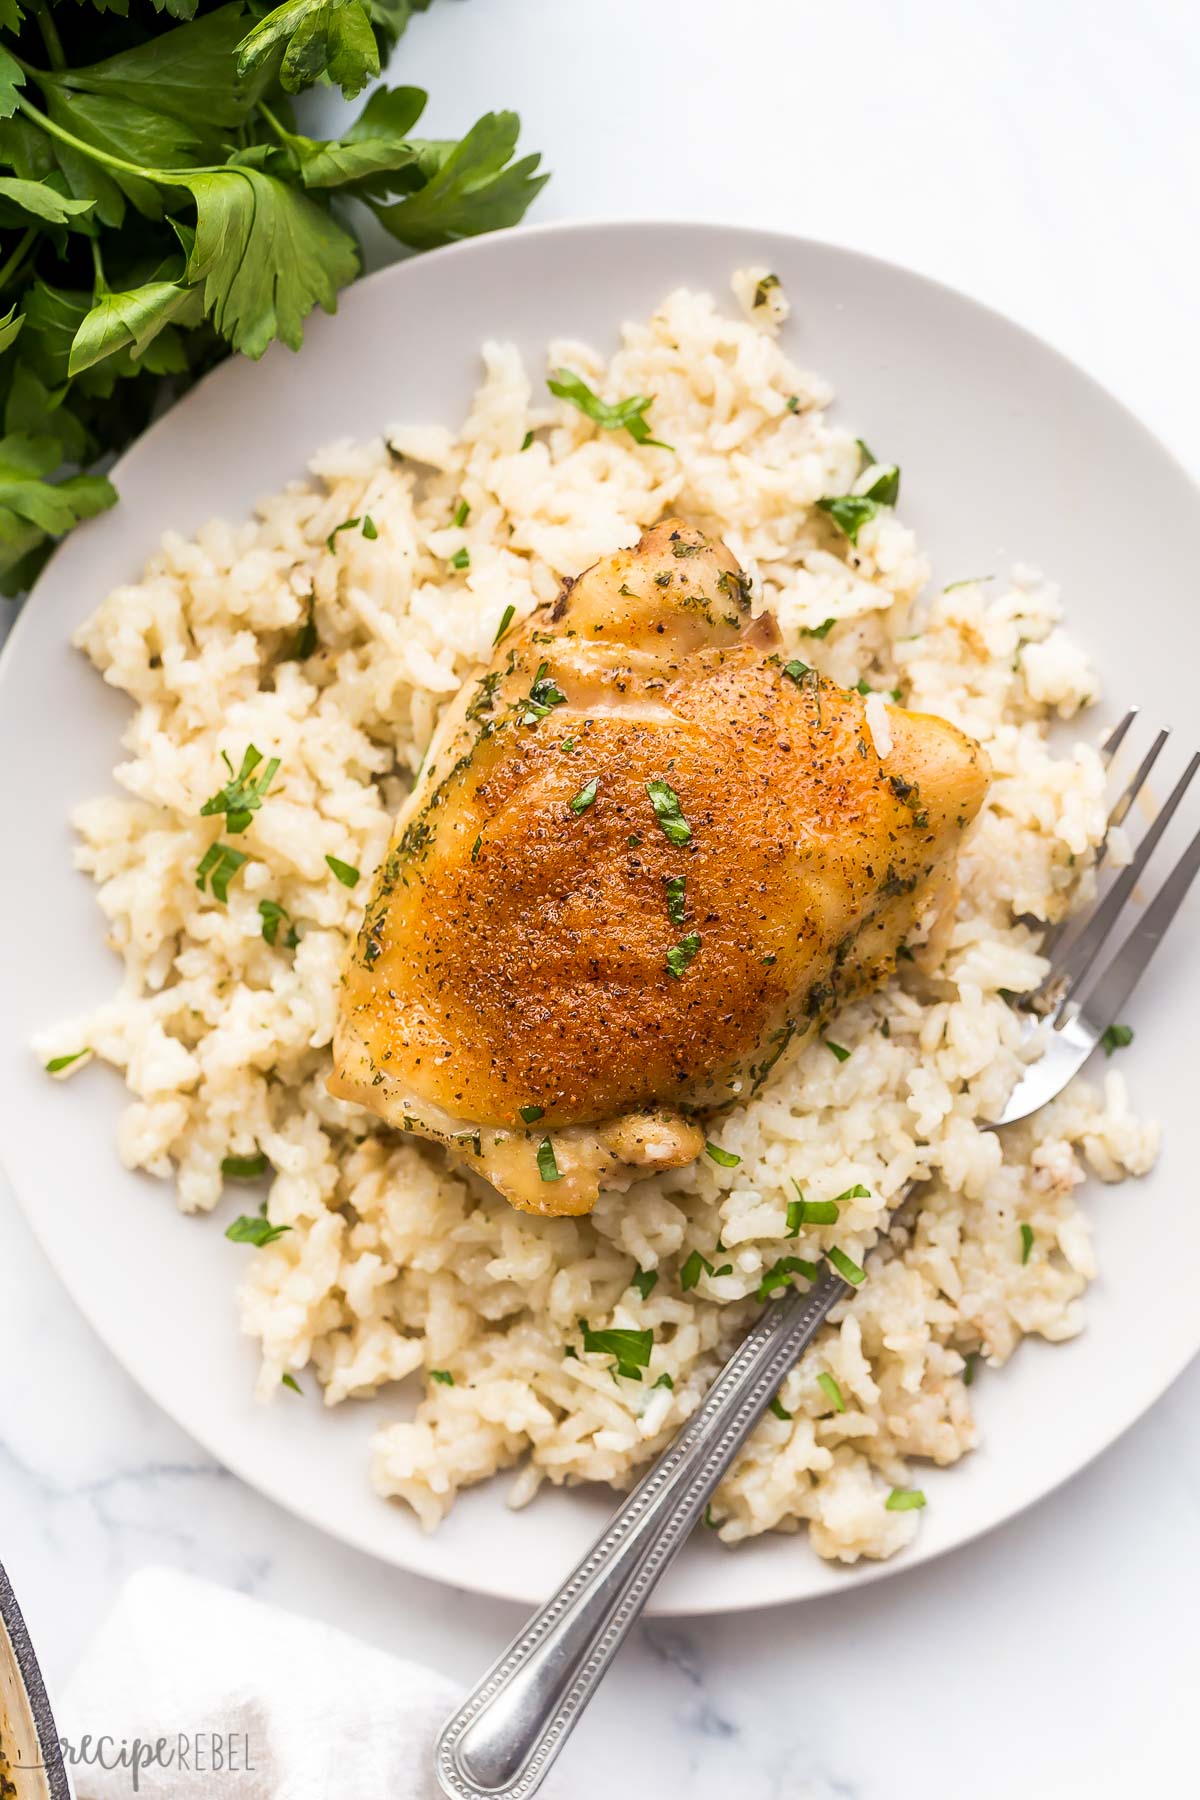 one baked chicken thigh on top of bed of rice on plate with fork